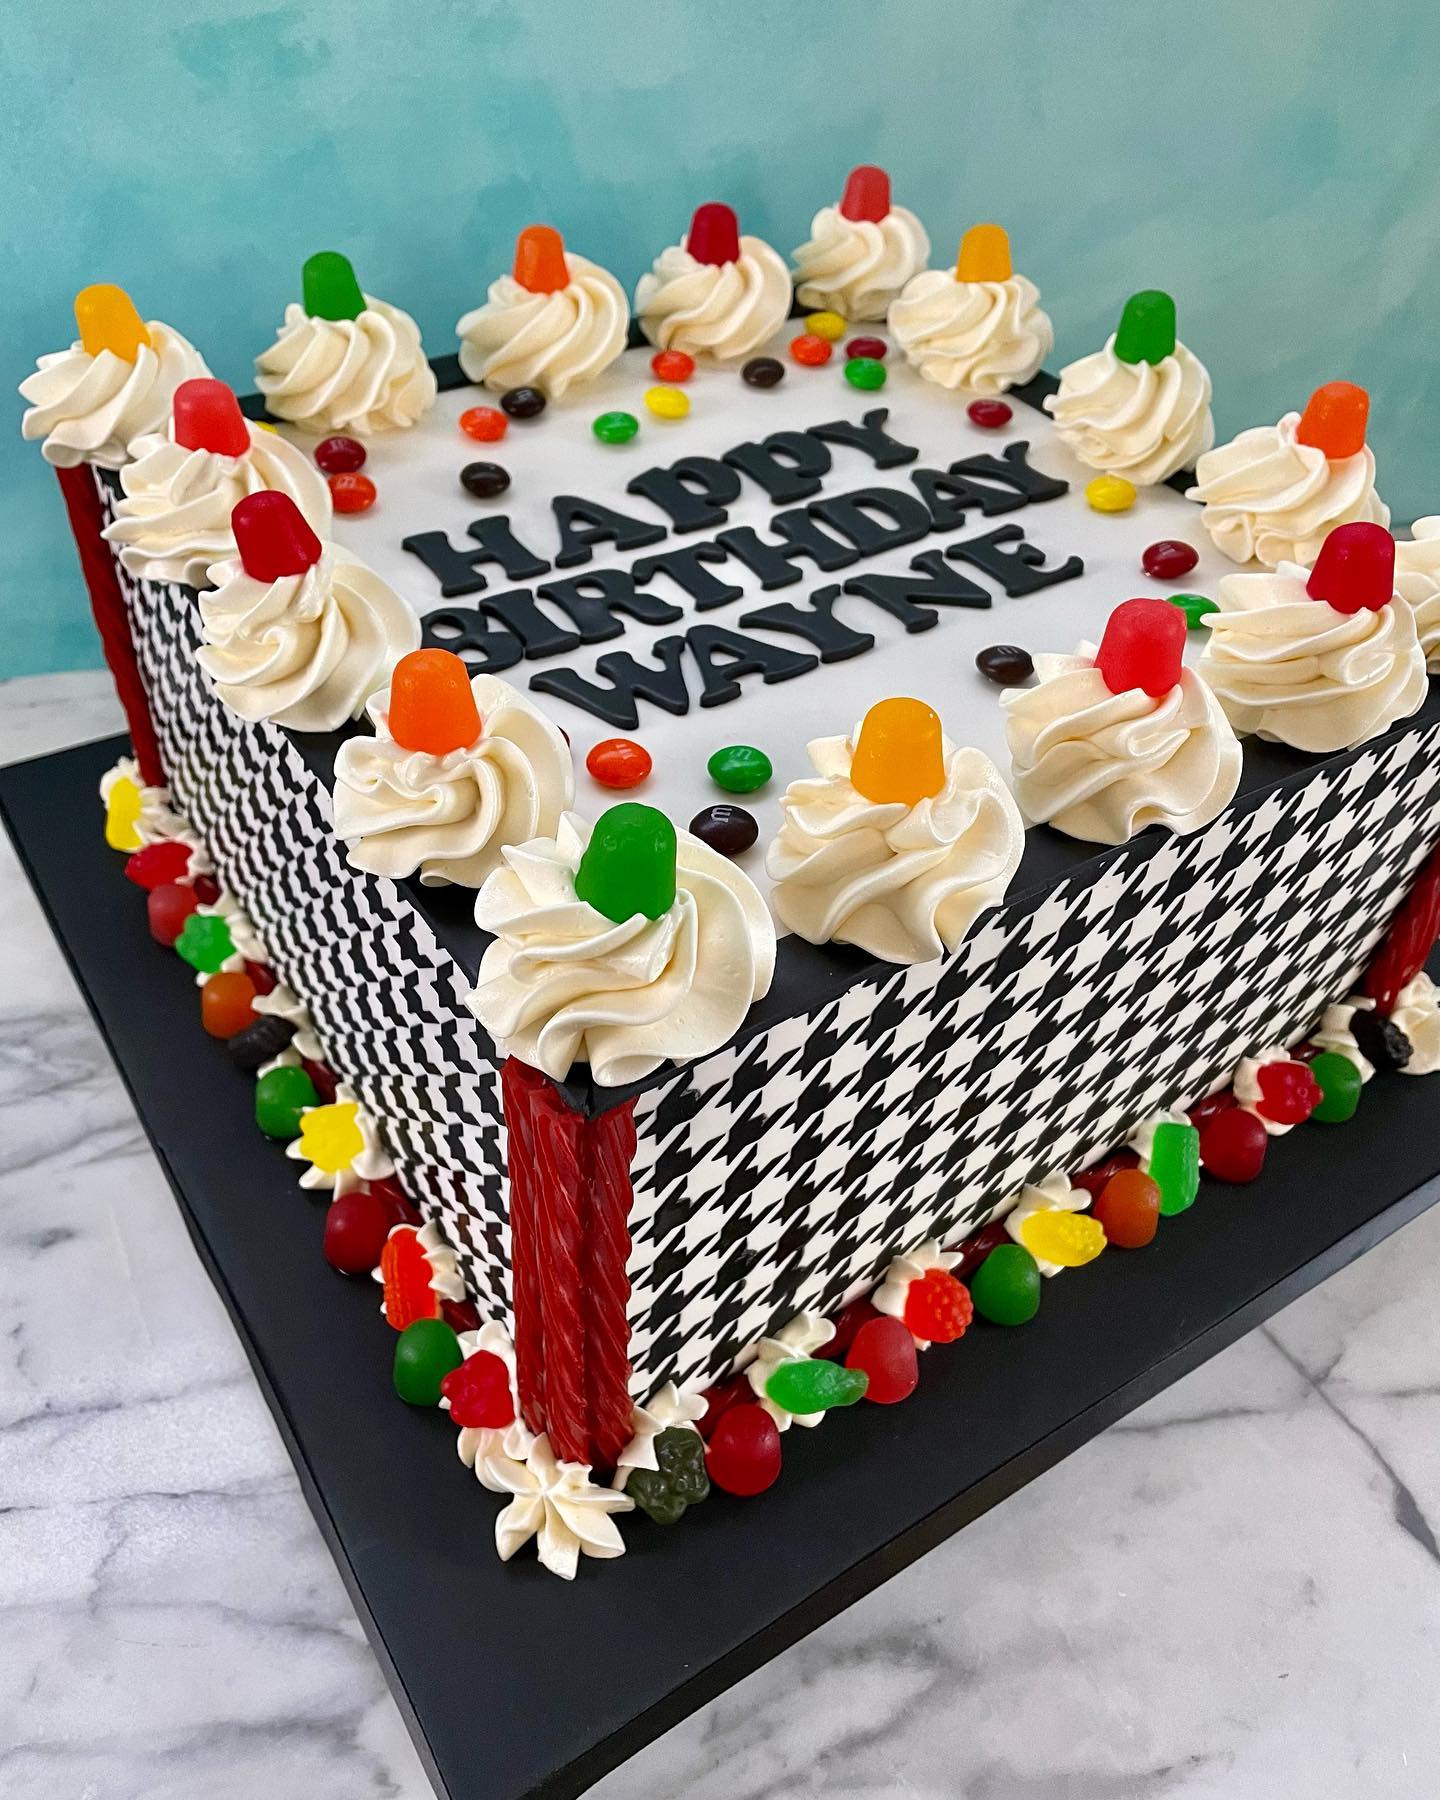 It took me a minute to envision how to combine the houndstooth party theming with the birthday boy’s fave candies, but I love the fun and original results! #houndstooth #houndstoothcake #candycake